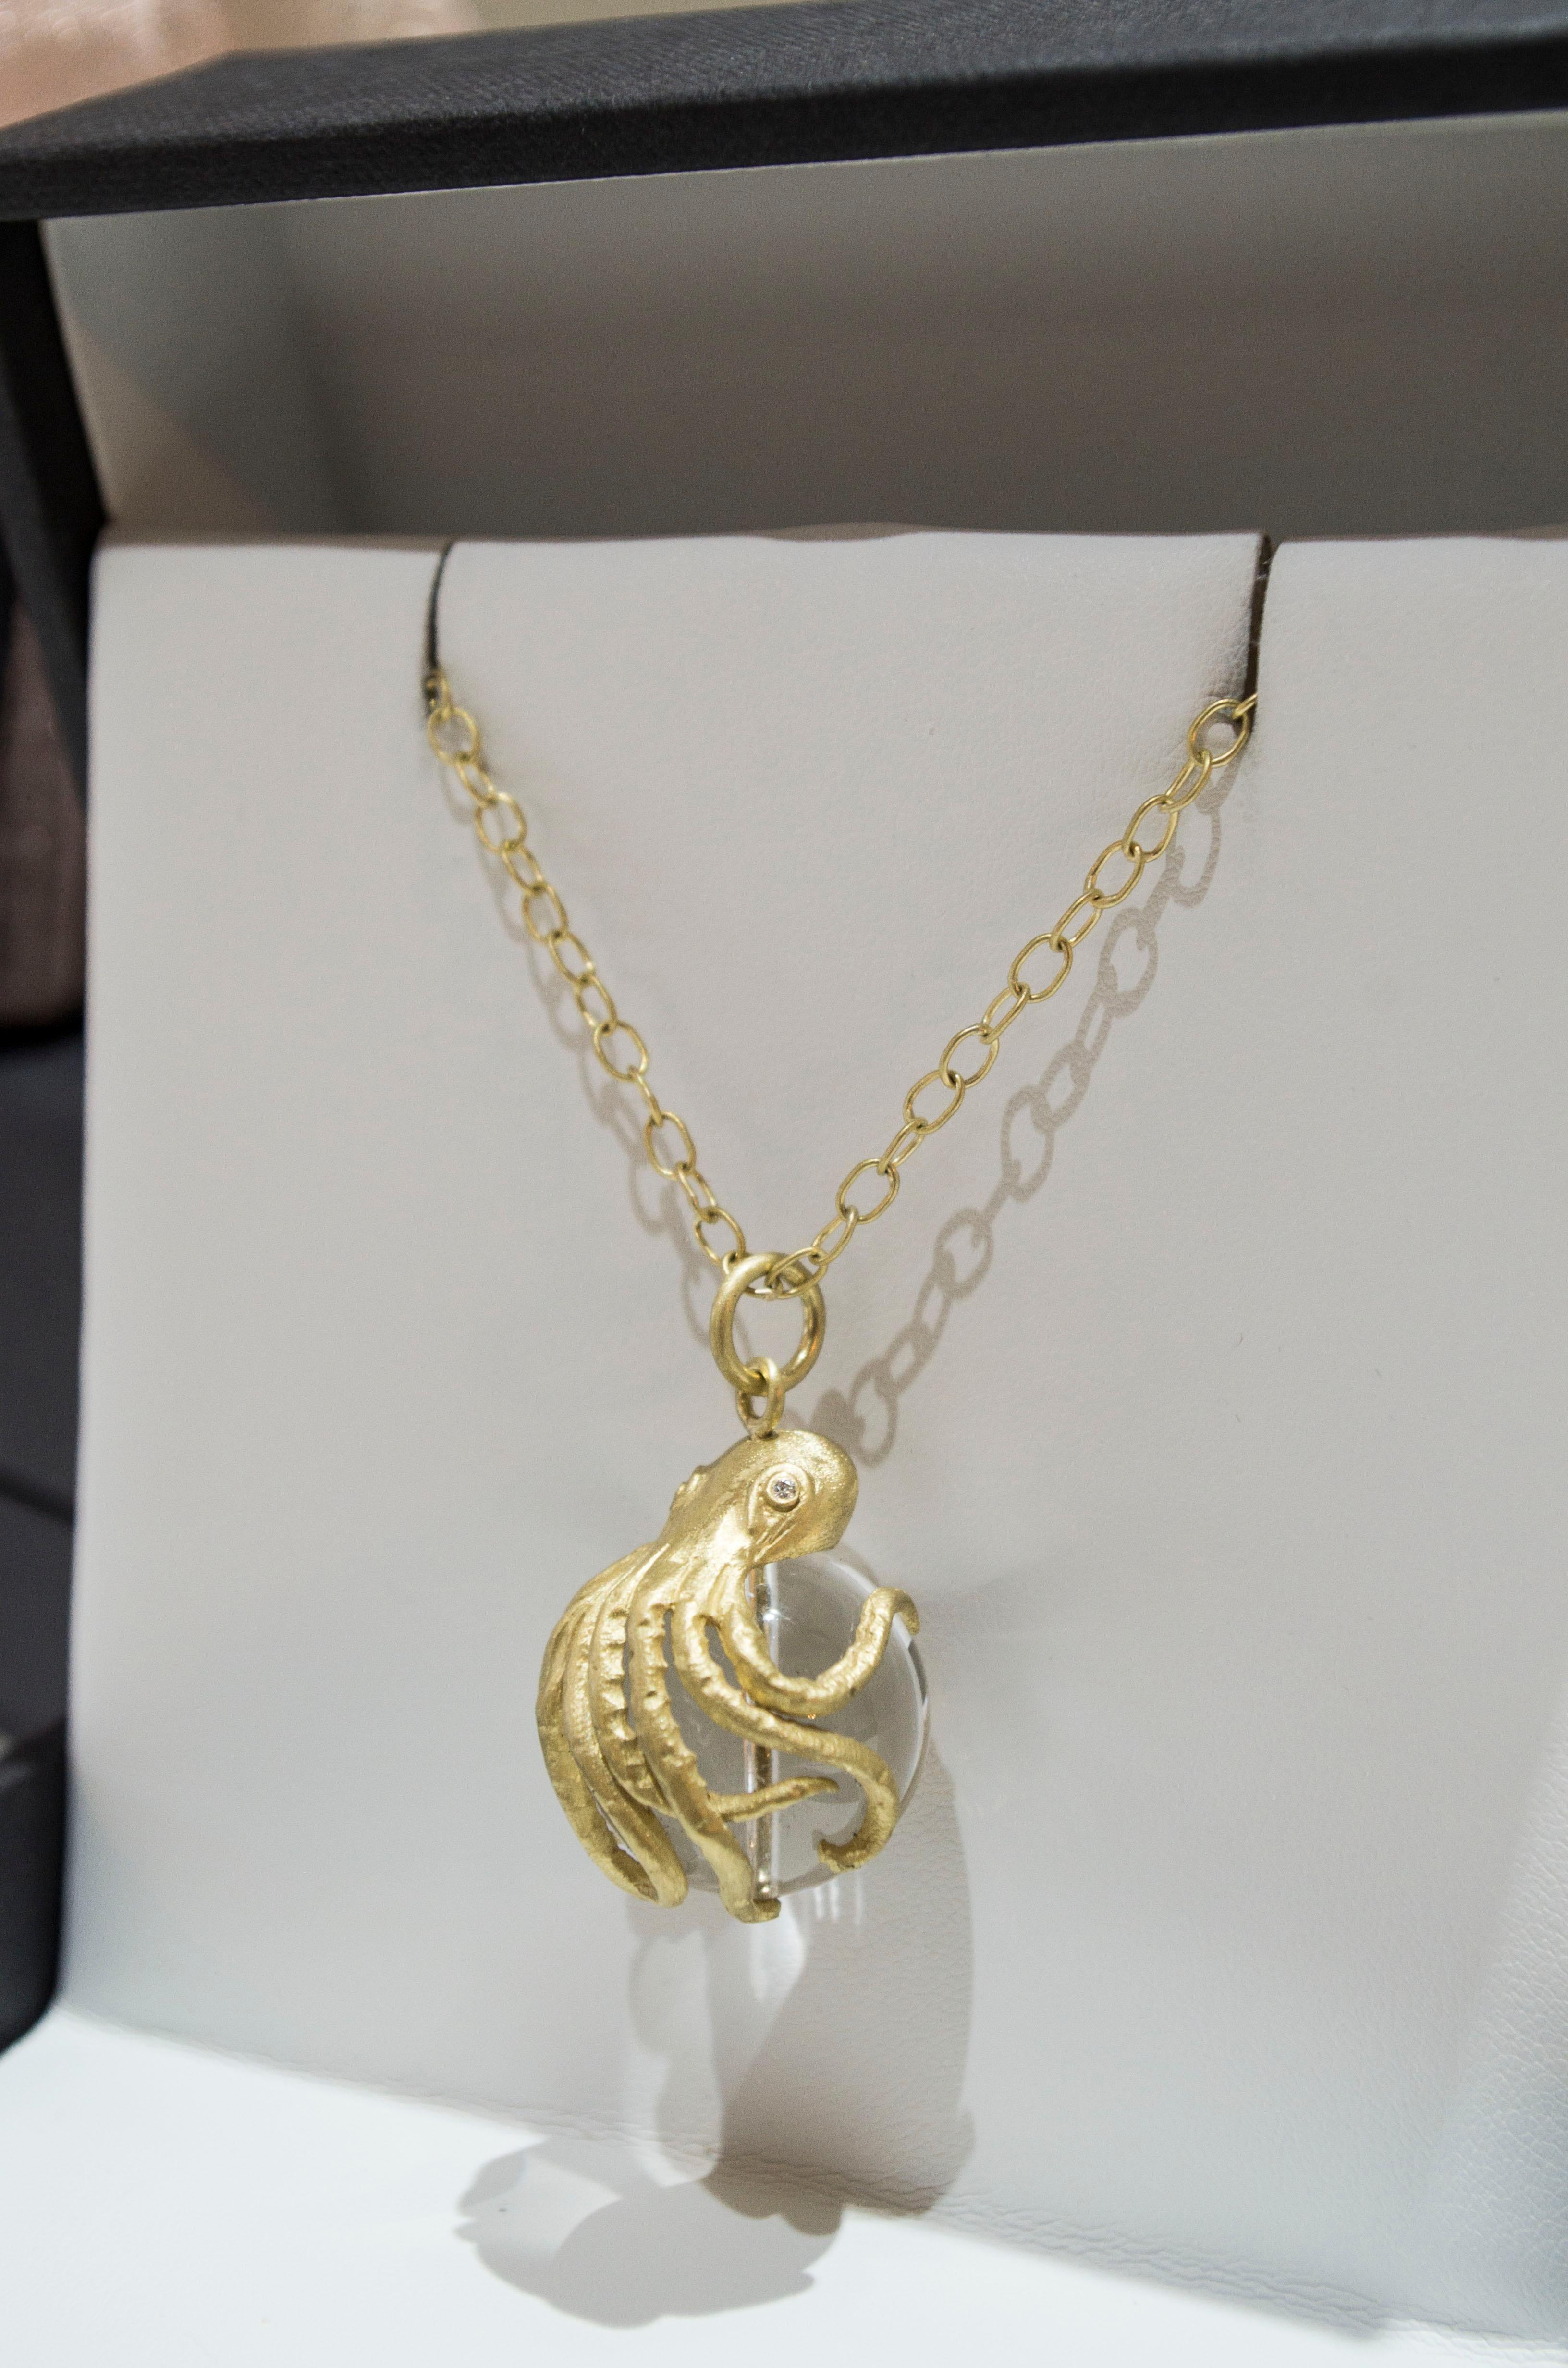 Fall in love with Faye's gold Octopus pendant.  With its eight arms embracing a Rock Crystal Quartz bead and bright diamond eyes, it's a whimsical treasure from the sea. Chain is handmade in 18k gold. 28